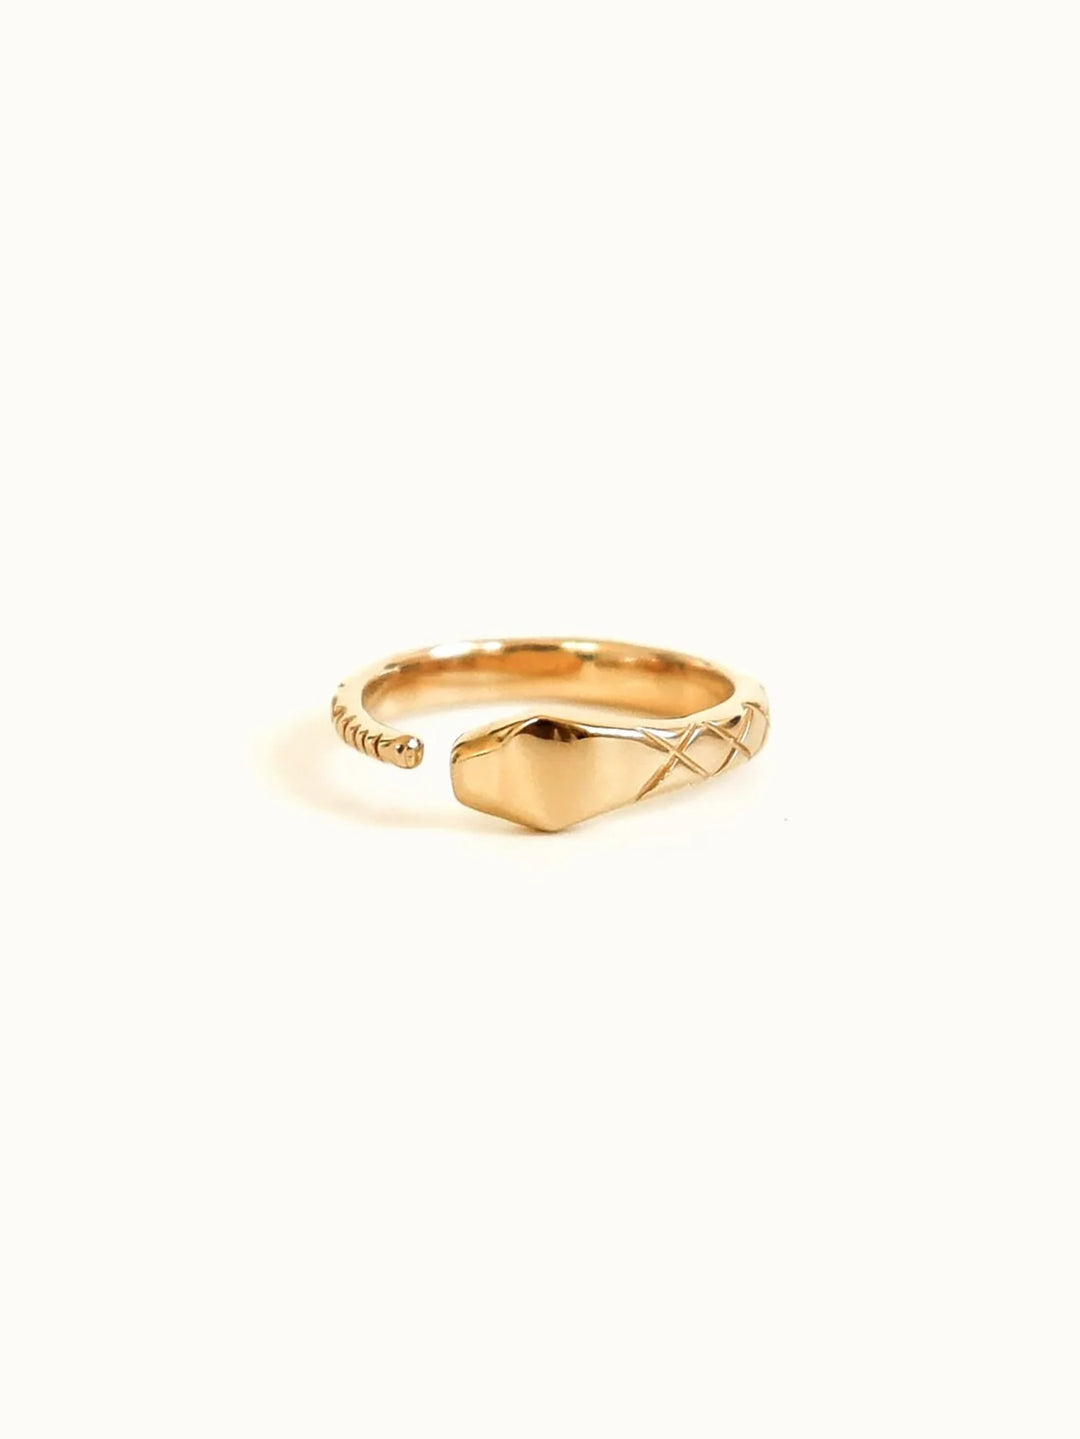 Helios Sun Ring. Solid Gold. (Made-To-Order) US 5 / Shiny